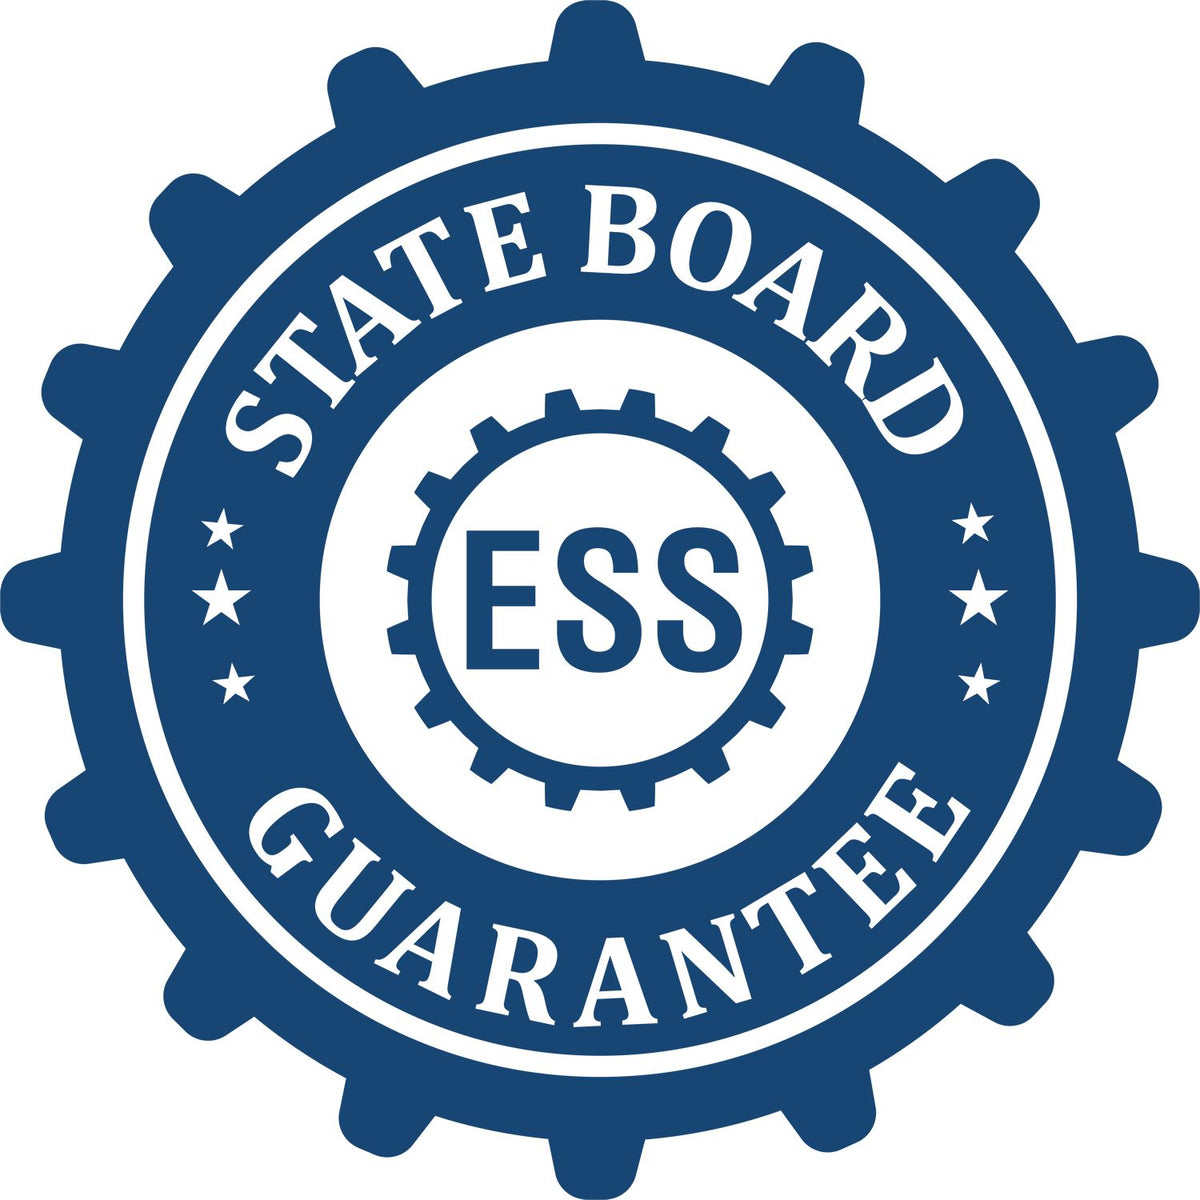 An emblem in a gear shape illustrating a state board guarantee for the Gift New York Land Surveyor Seal